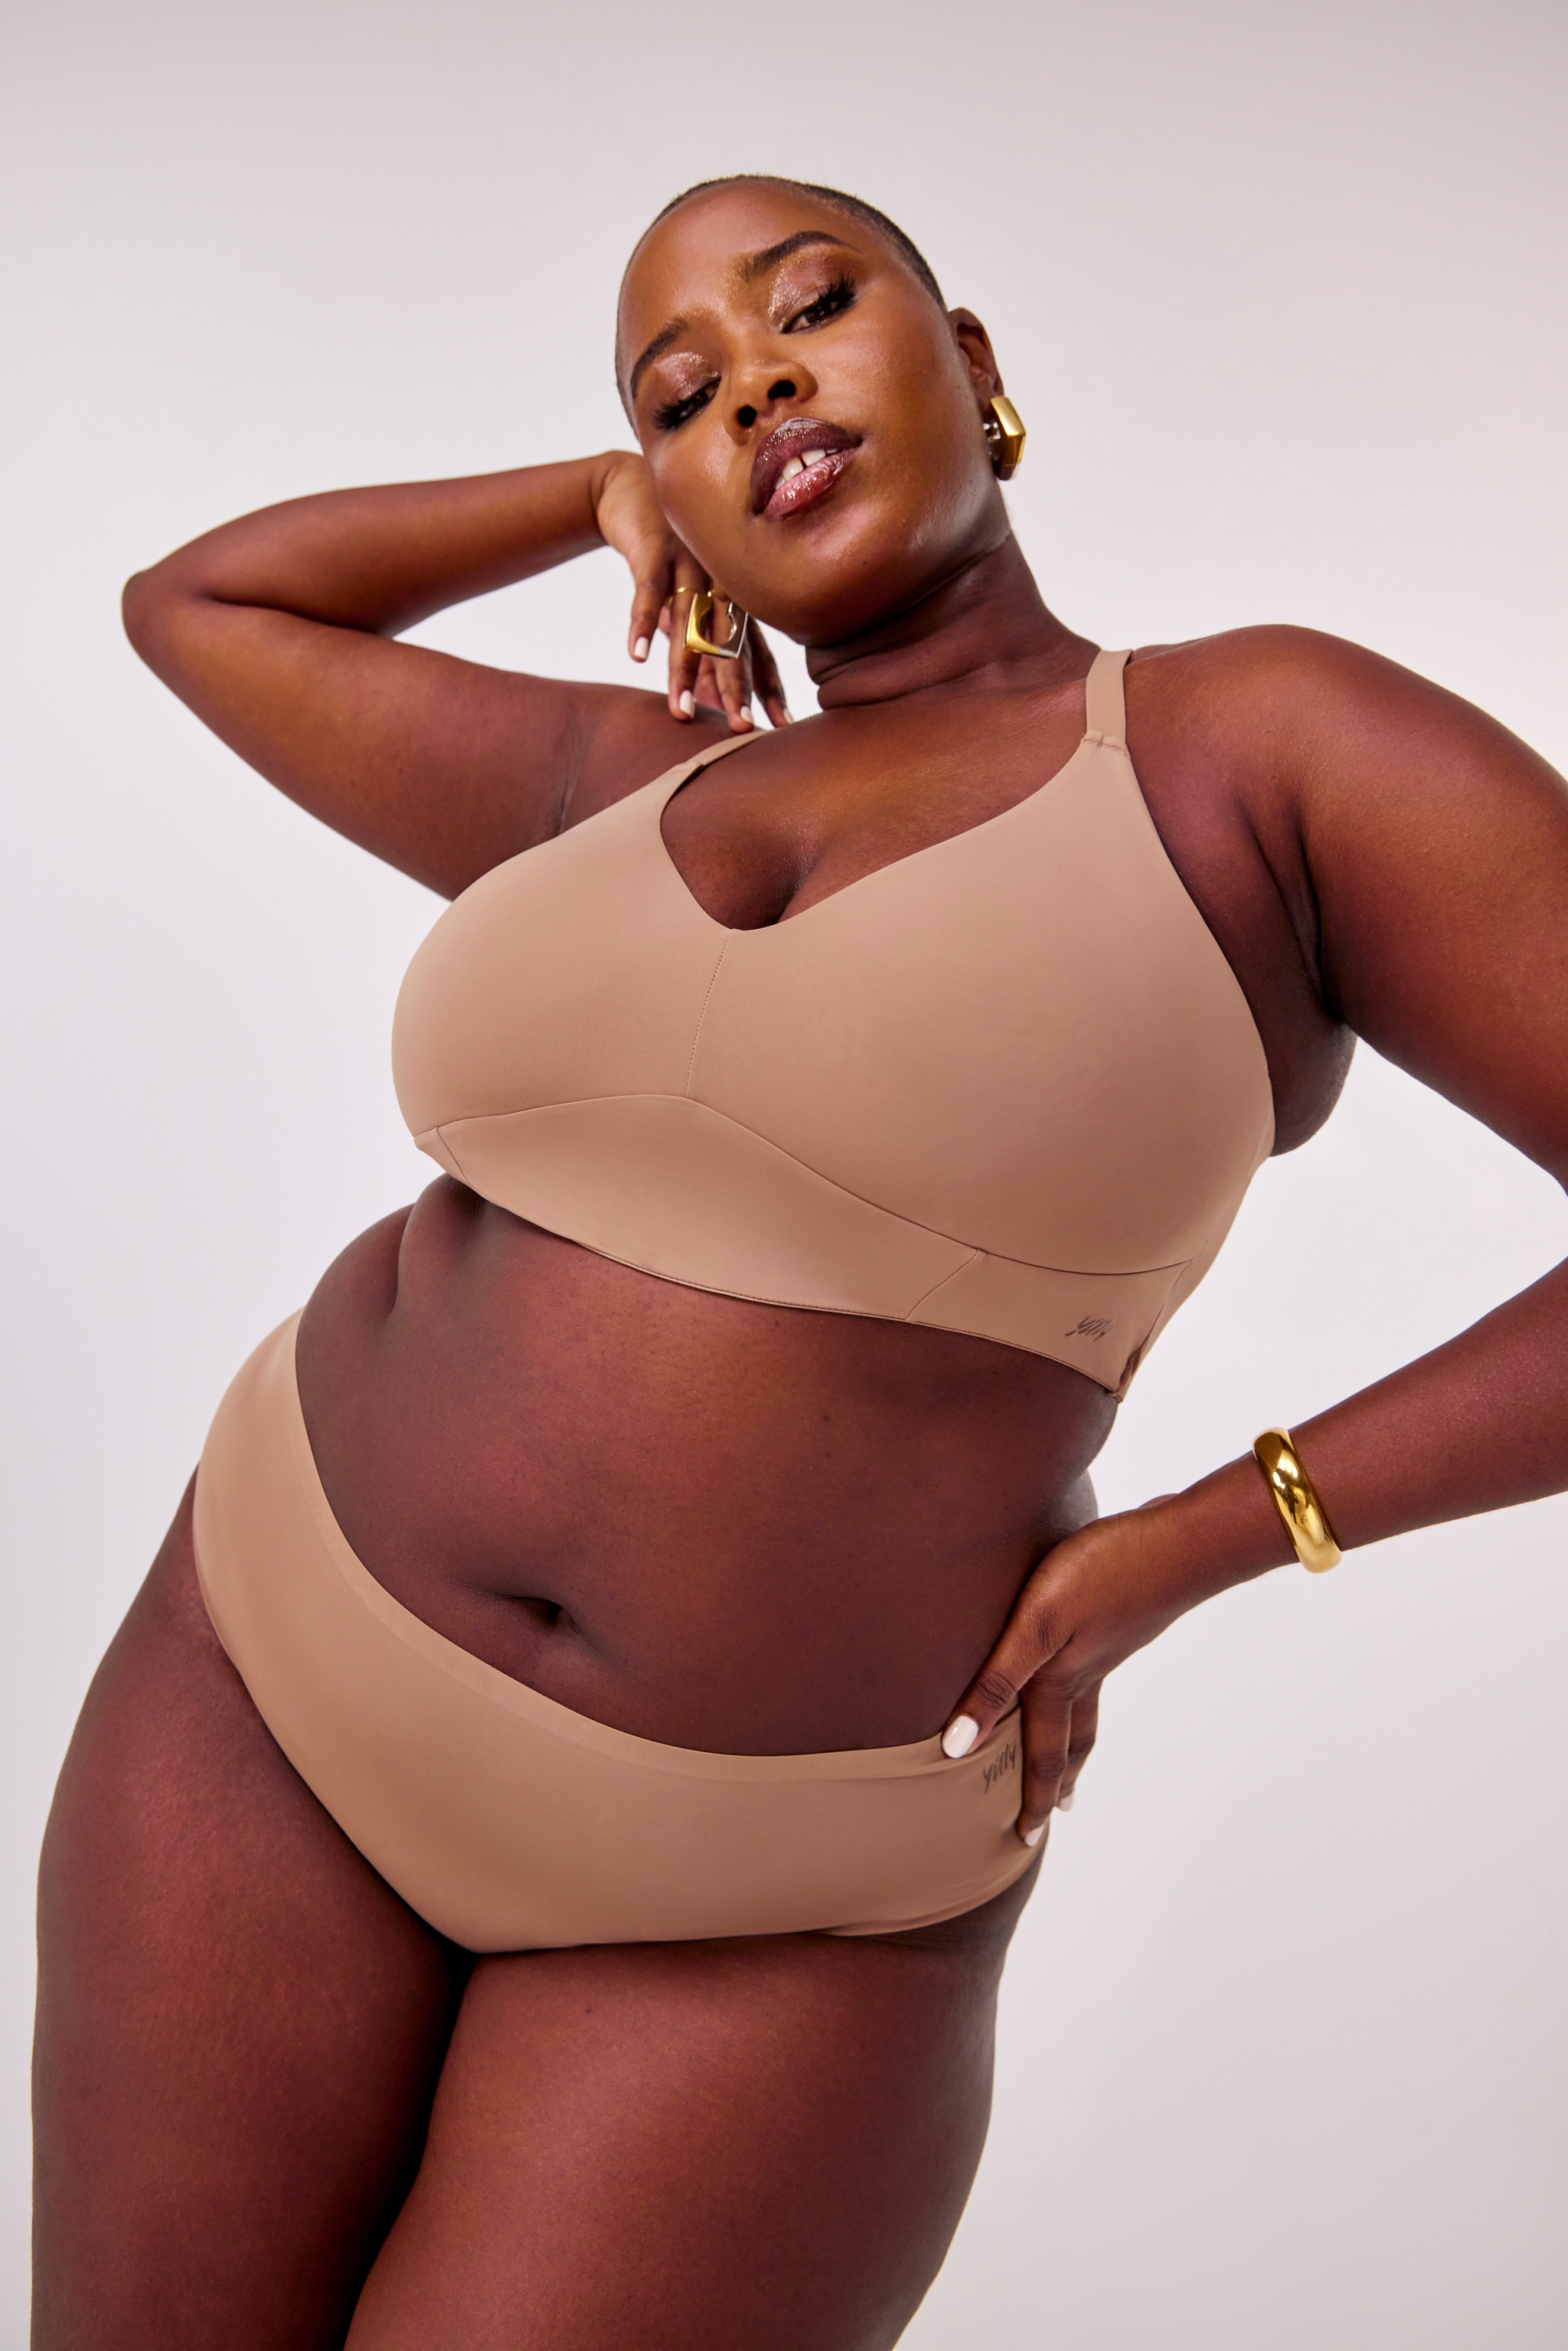 Yitty, the underwear brand founded by Lizzo, continues to expand